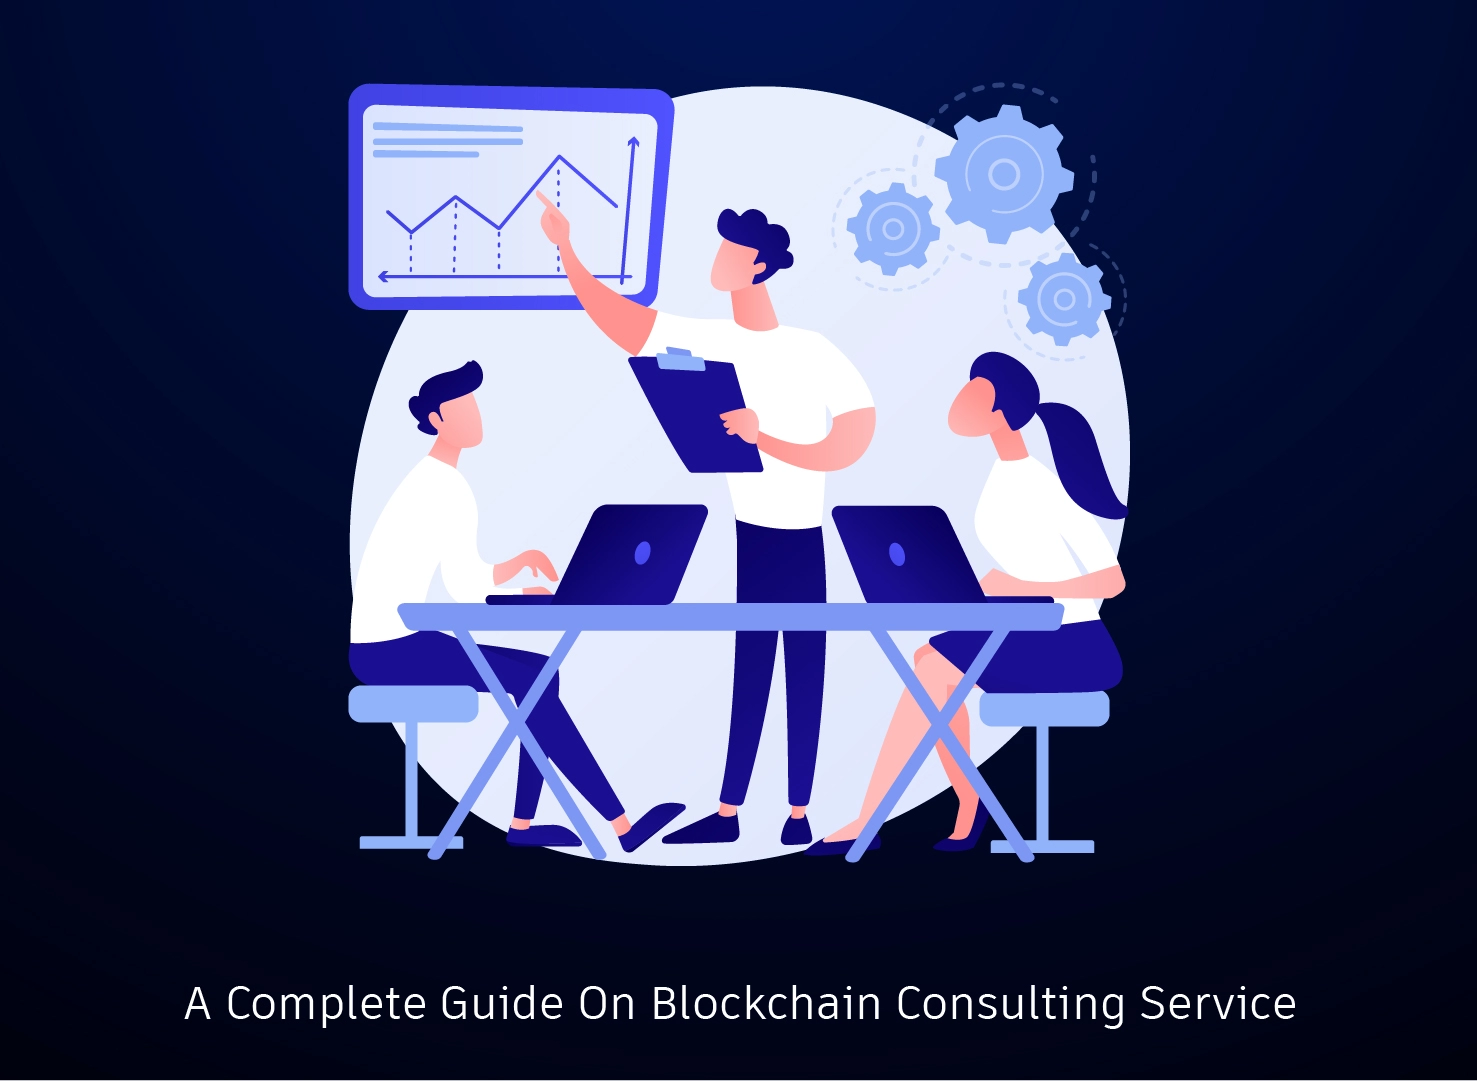 A Complete Guide on Blockchain Consulting Service